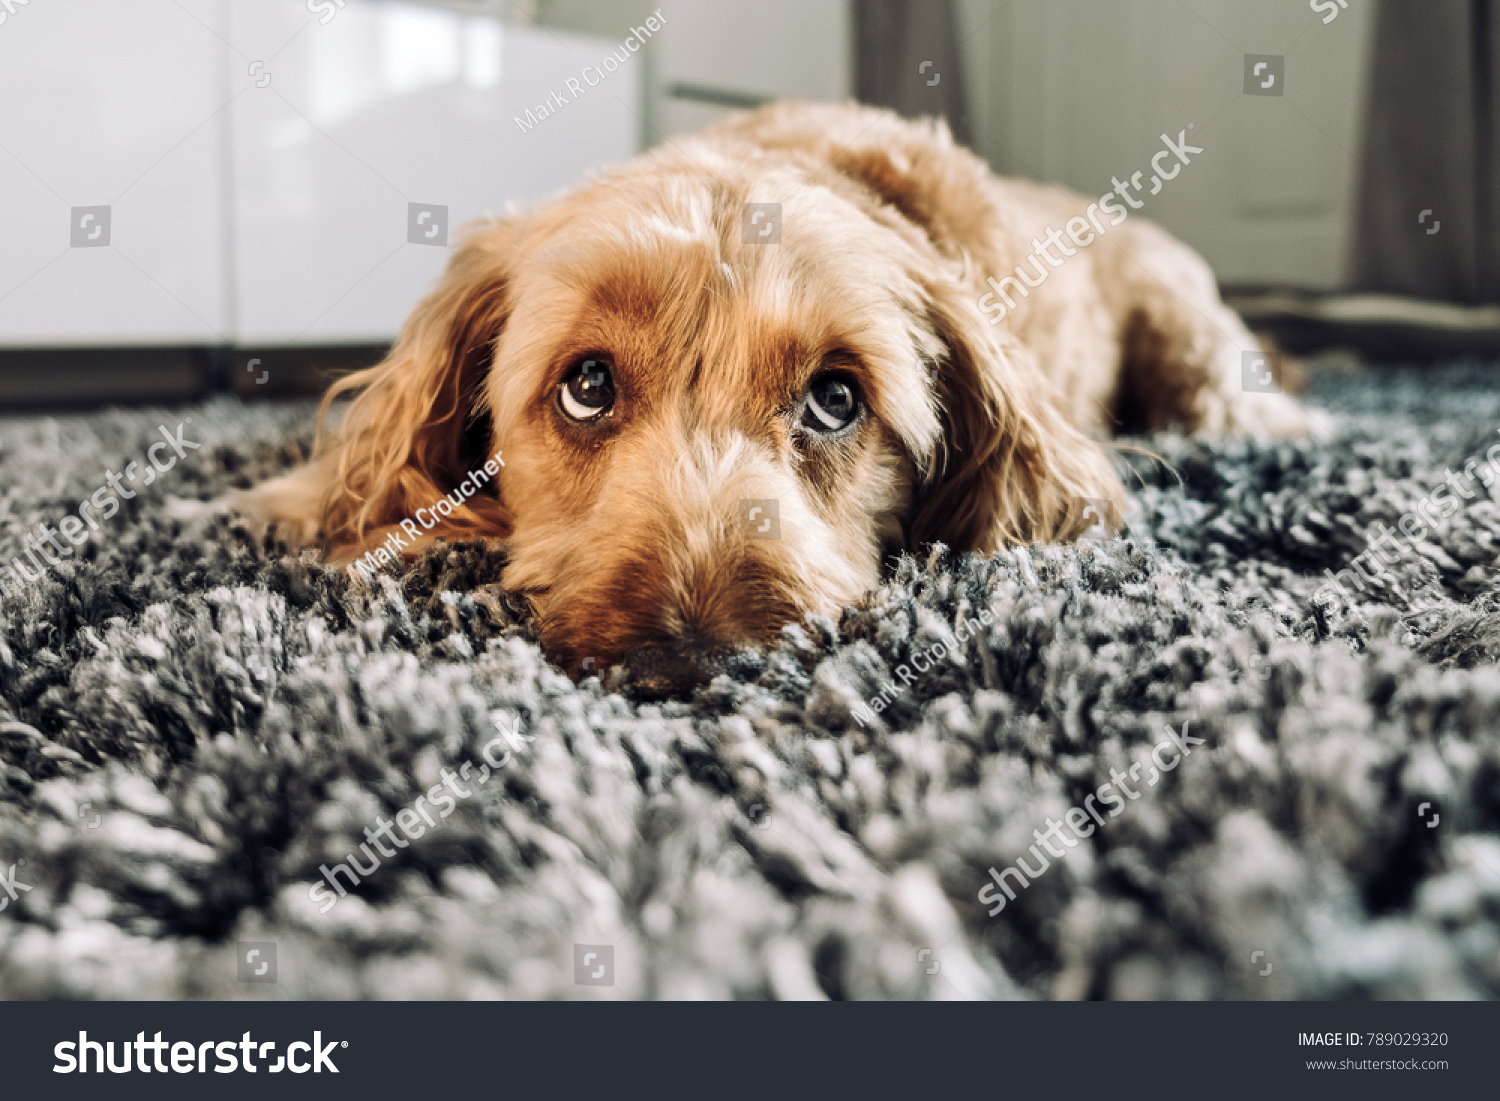 Cute dog giving his best puppy dog eyes. #789029320